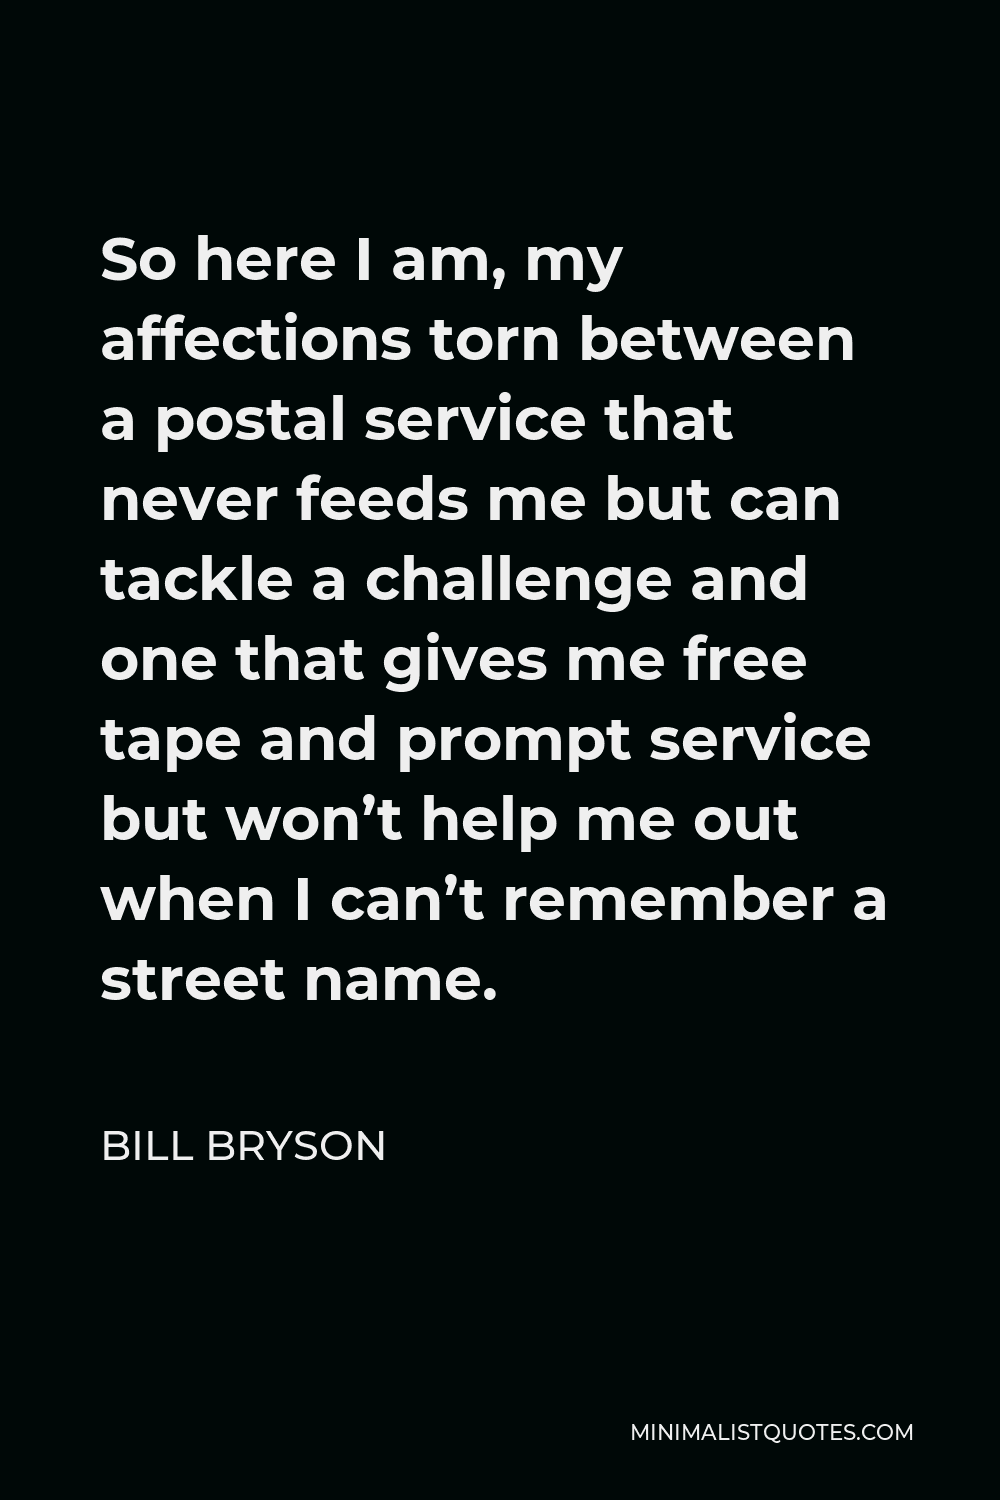 Bill Bryson Quote - So here I am, my affections torn between a postal service that never feeds me but can tackle a challenge and one that gives me free tape and prompt service but won’t help me out when I can’t remember a street name.